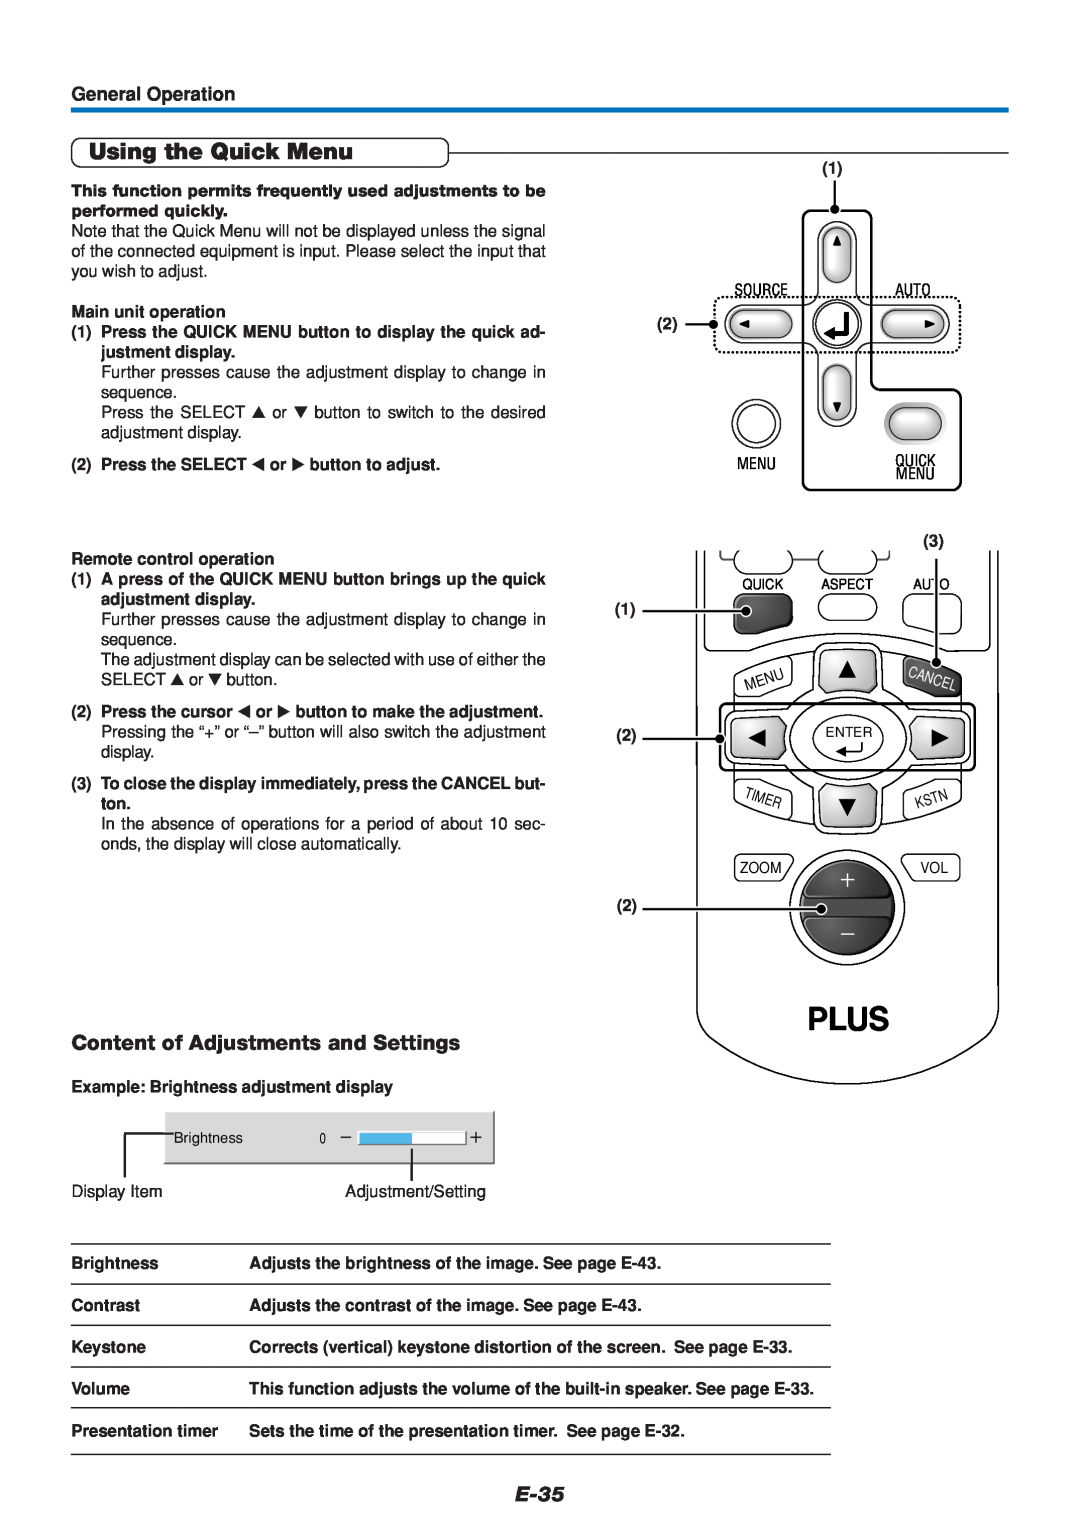 PLUS Vision U4-136 Using the Quick Menu, Content of Adjustments and Settings, E-35, General Operation, Main unit operation 